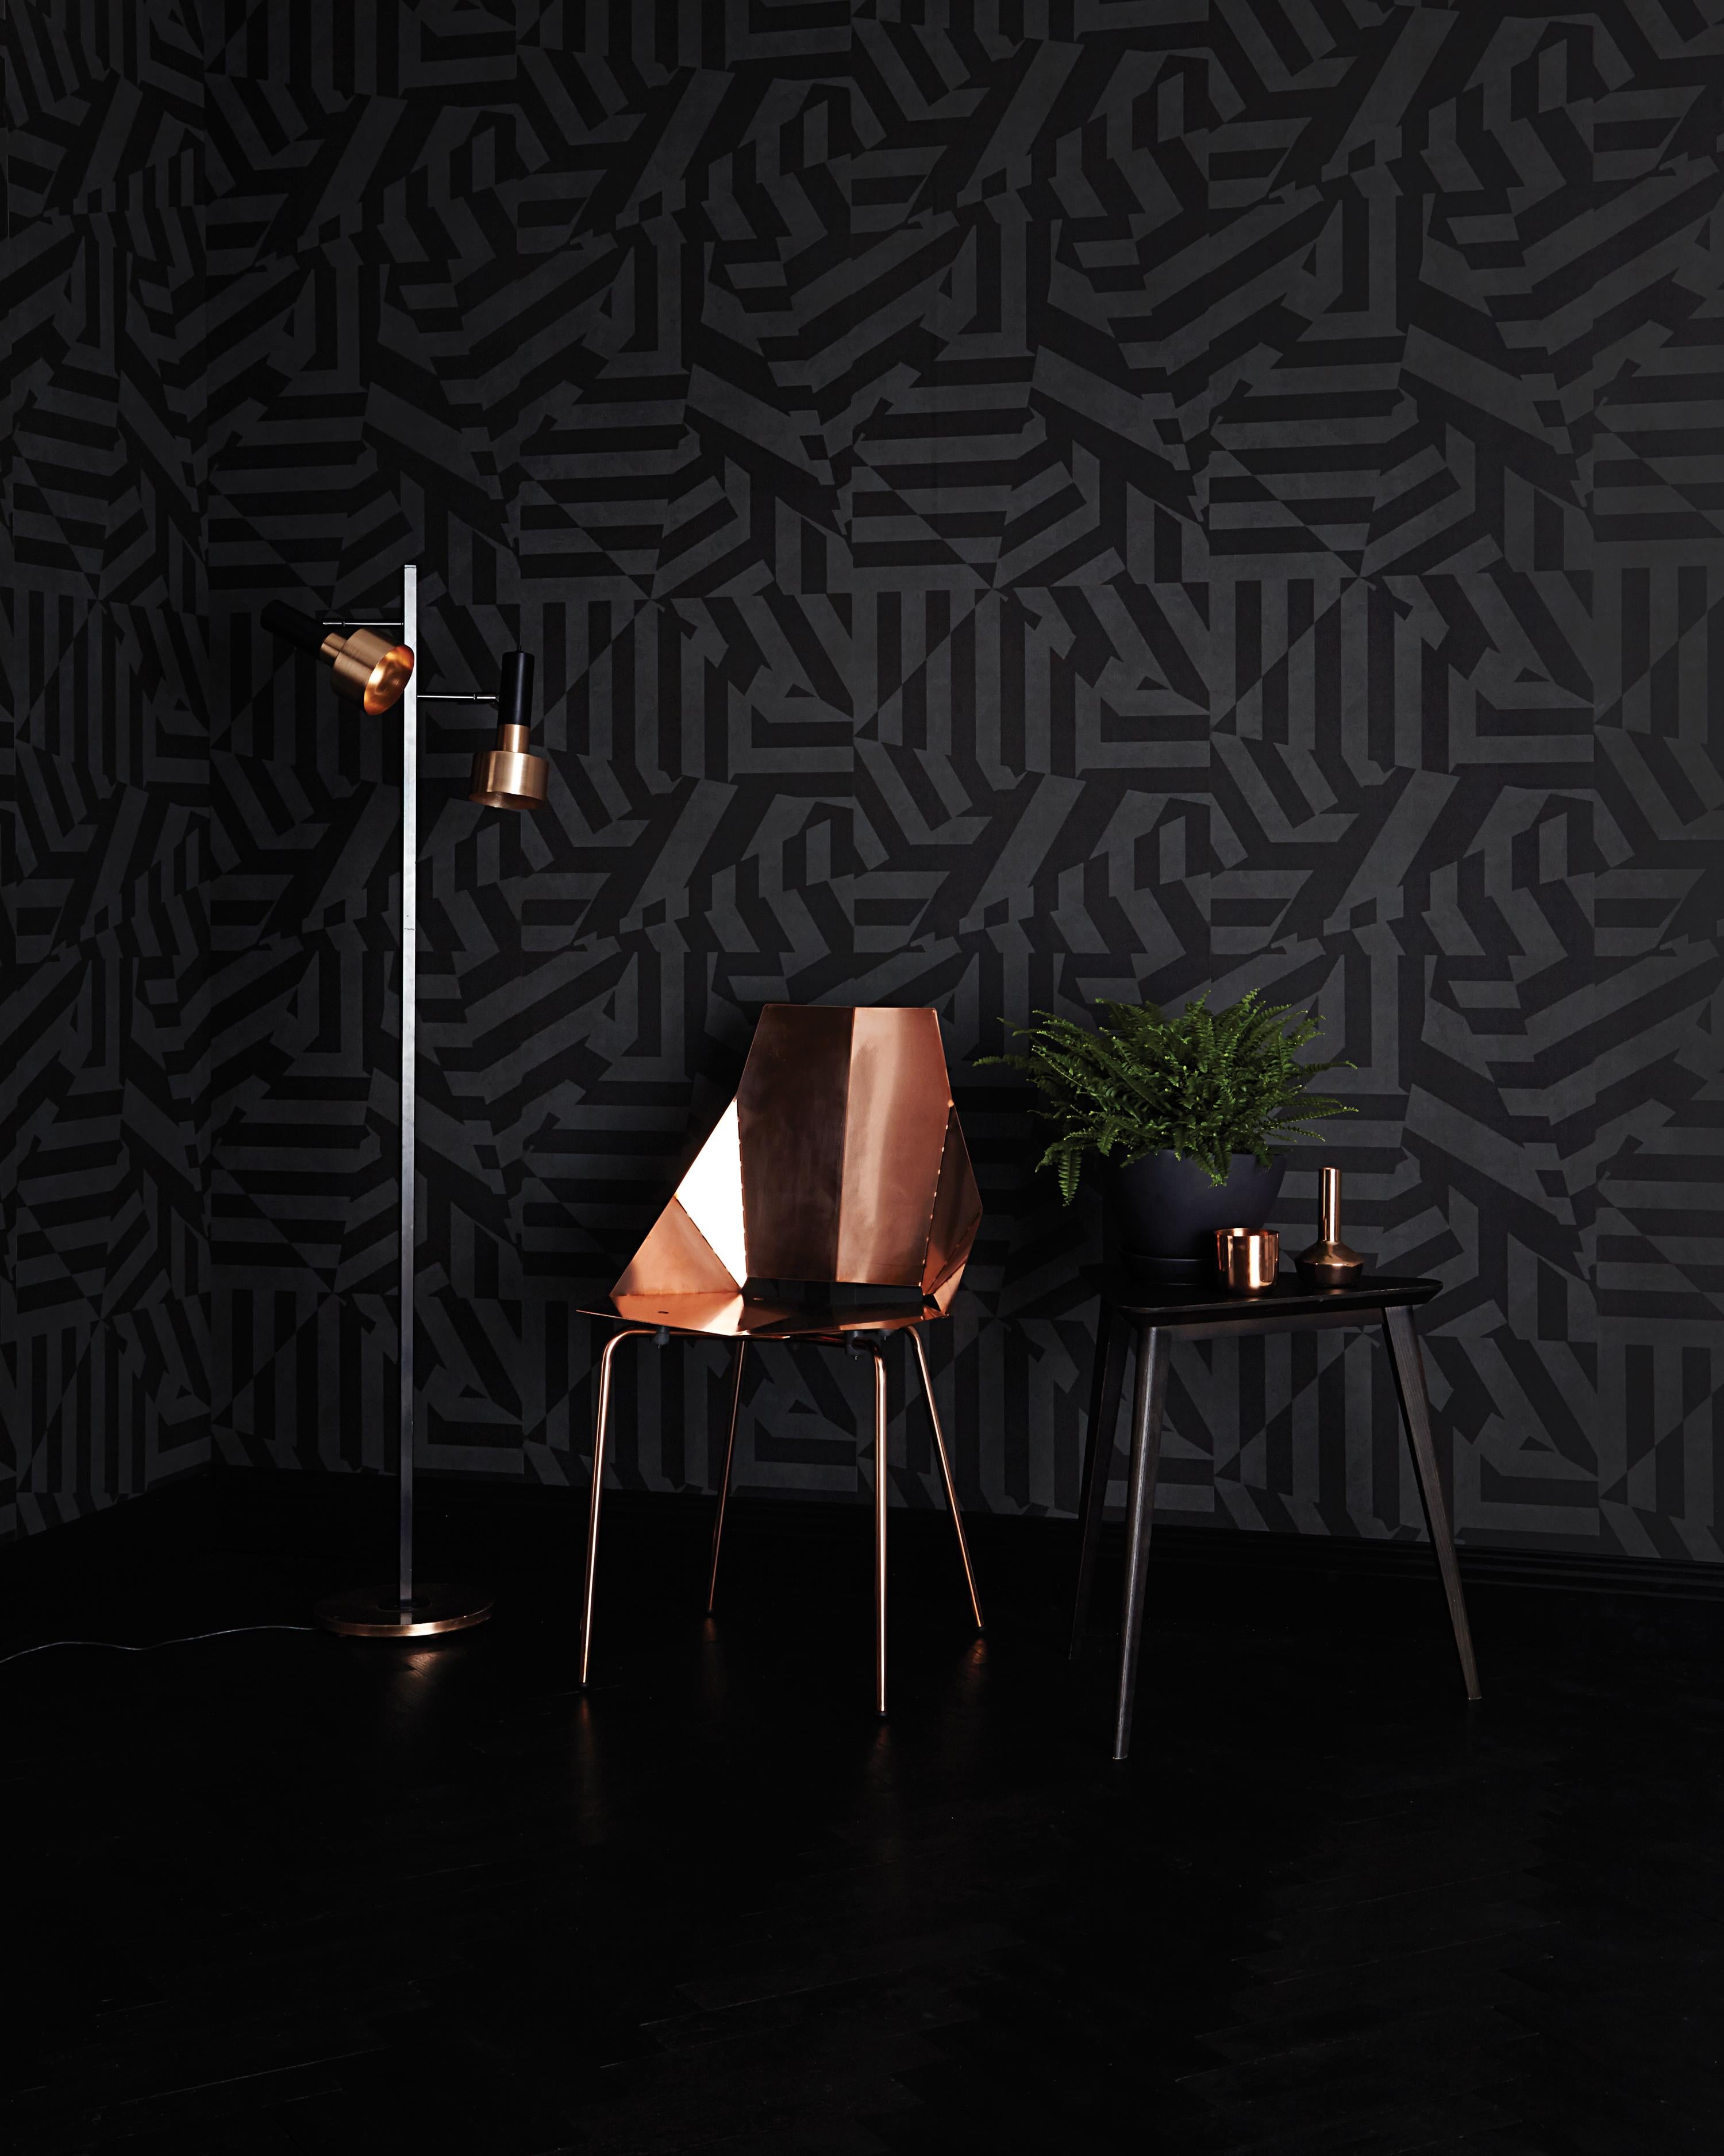 17 Patterns deliver an on-trend interpretation of the geometric art form, Dazzle. The 17 Patterns Dazzle collection features compellingly-dynamic shapes which interrupt and intersect each other in four contrasting monotone colours palettes. Our